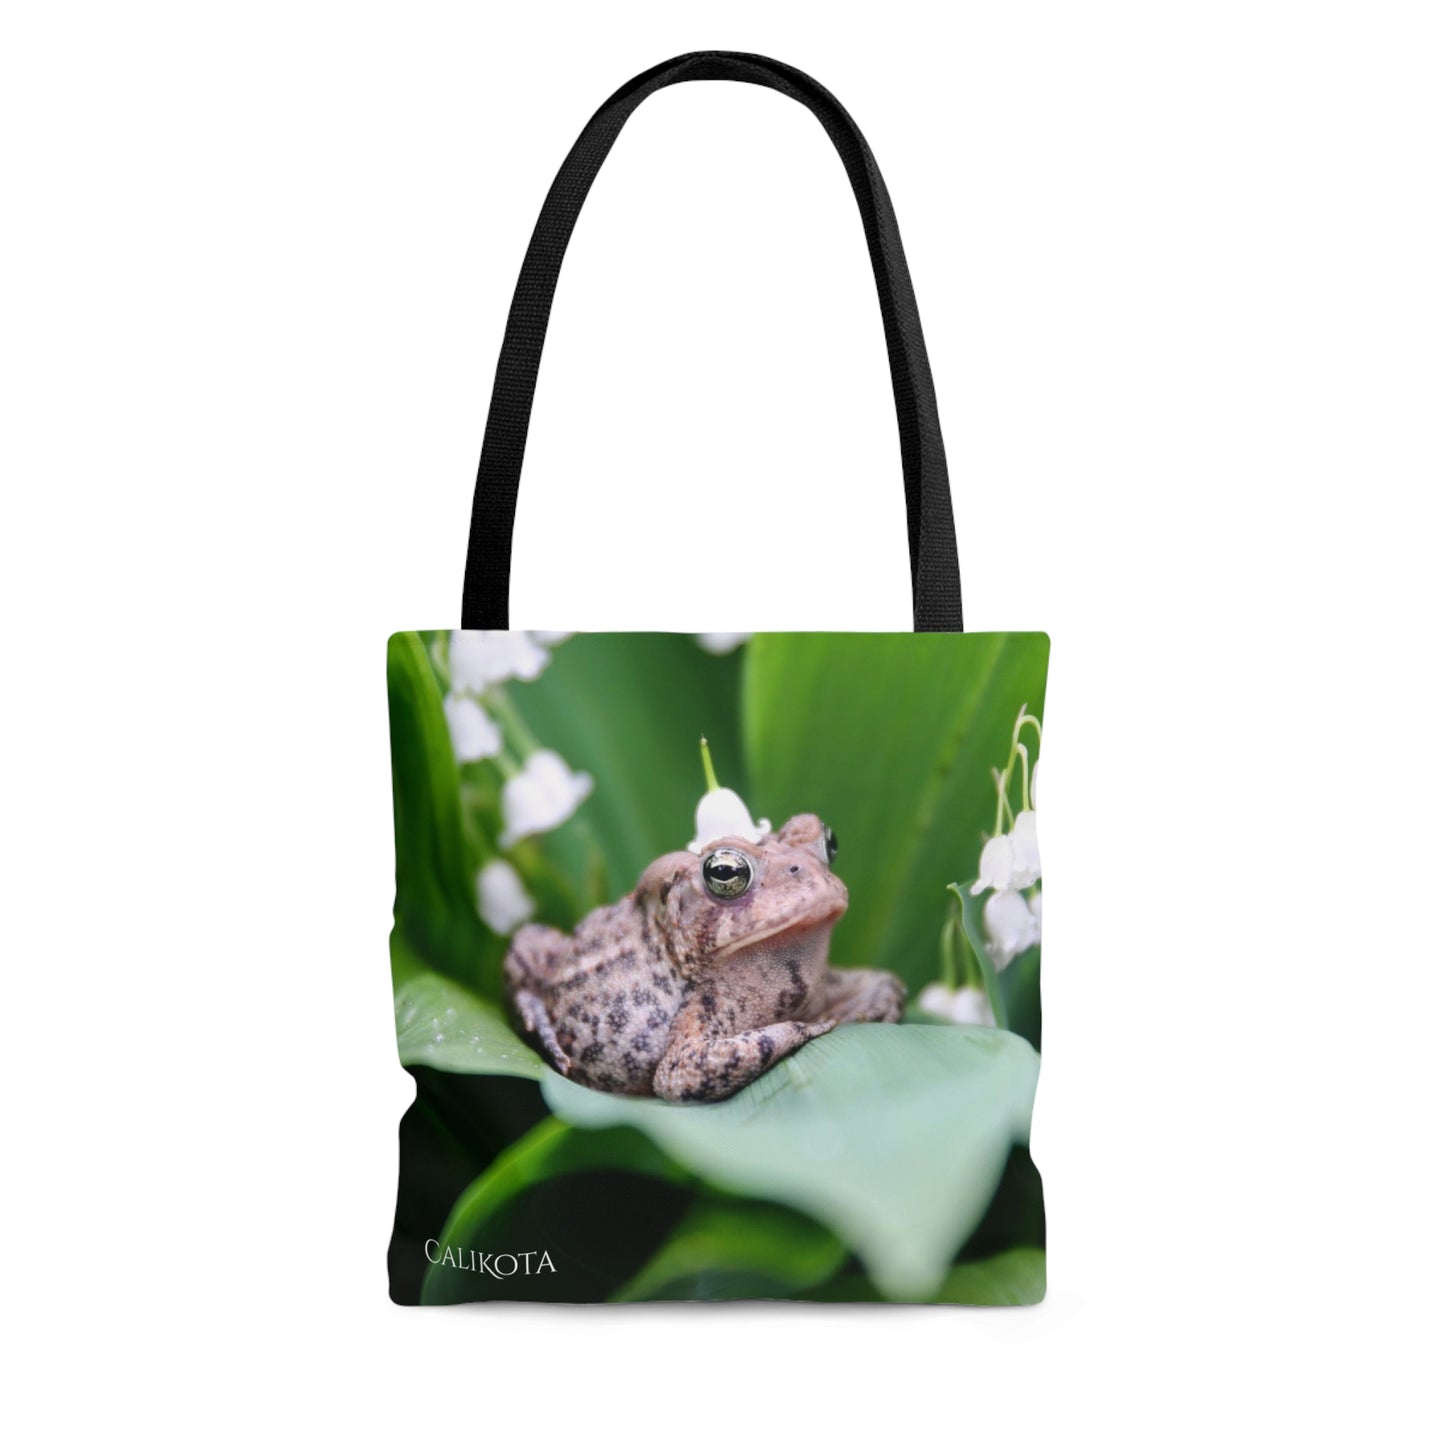 Toad lily of the valley tote bag